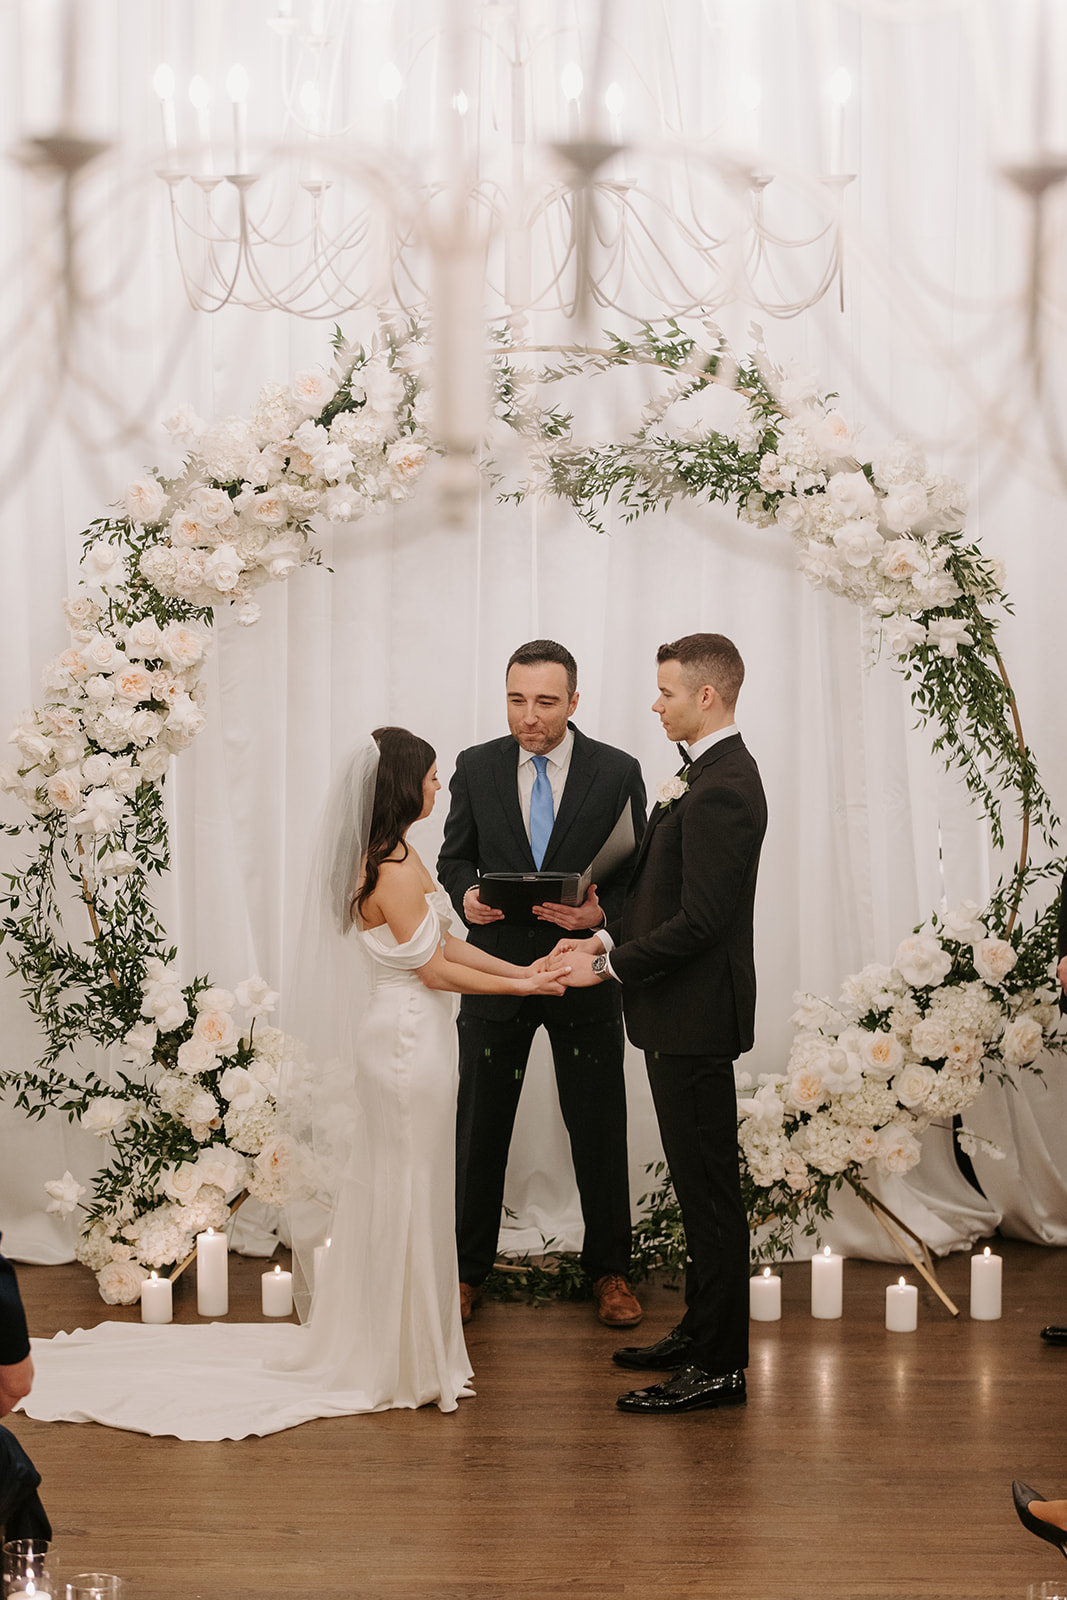 Bride and groom giving their vows with their officiant under a wedding arbor adorned with white flowers.